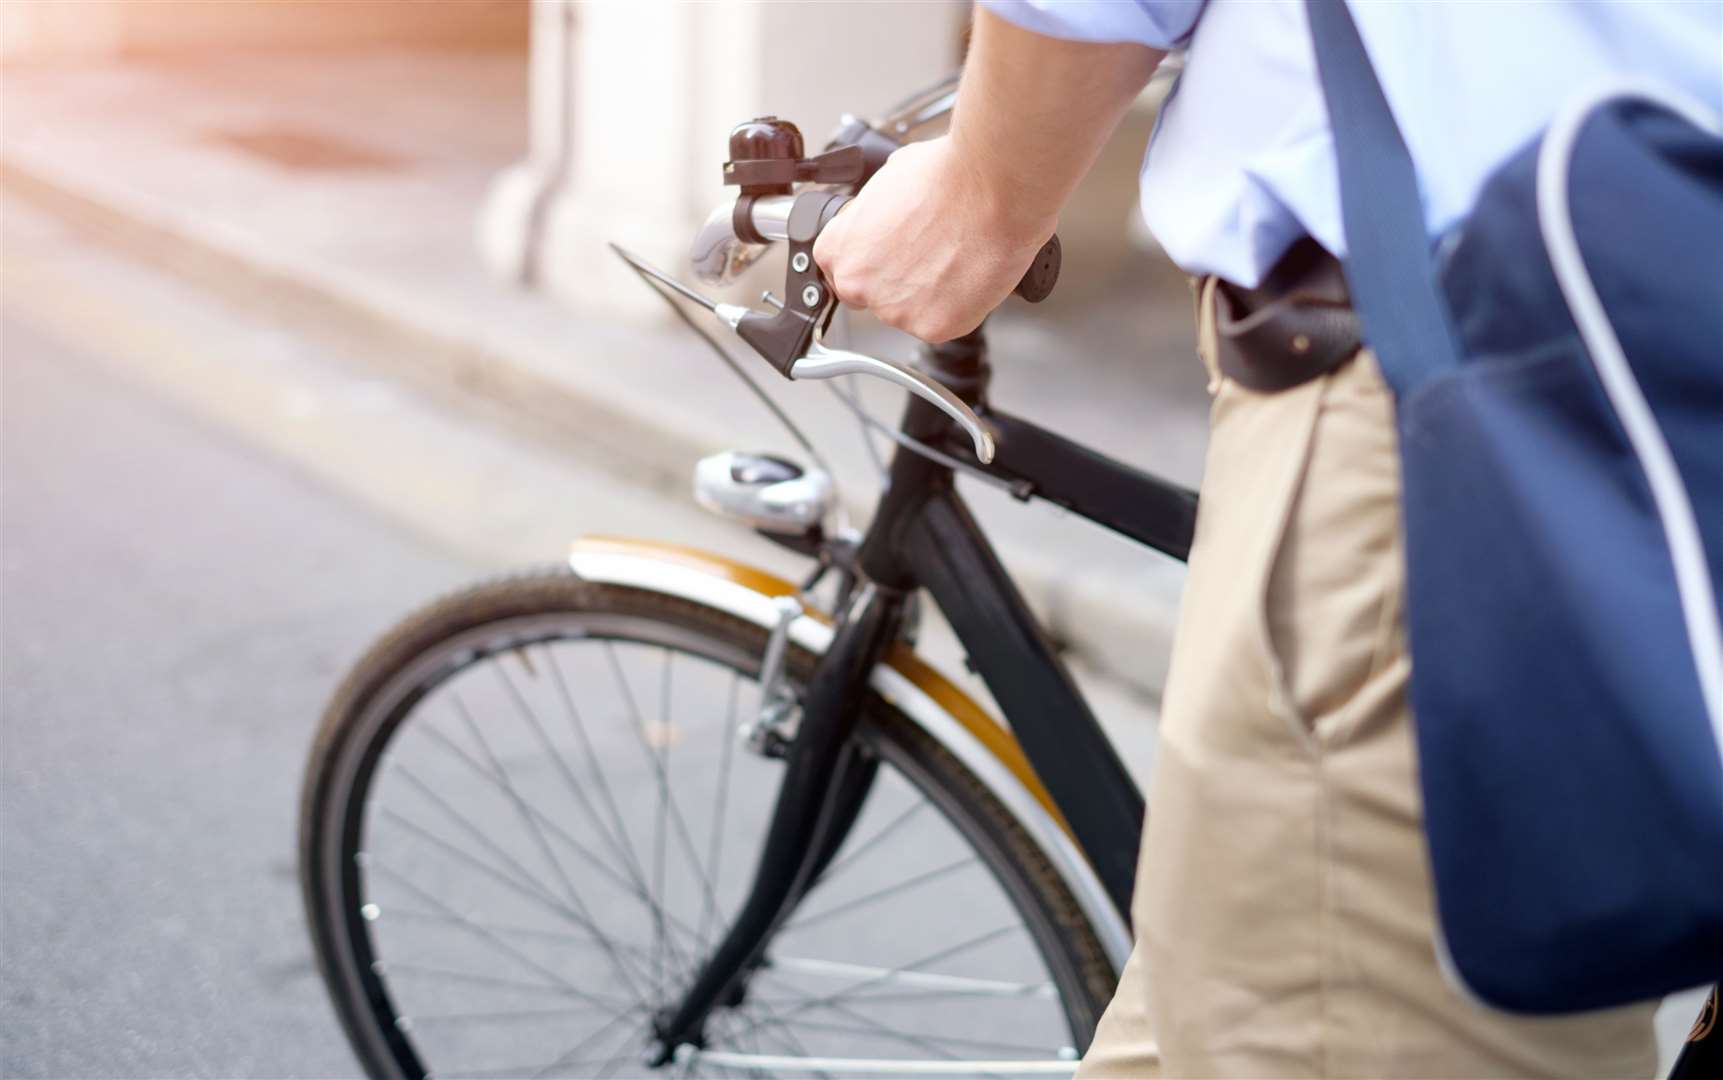 Cyclists and motorcyclists account for a quarter of road deaths. Image: iStock.